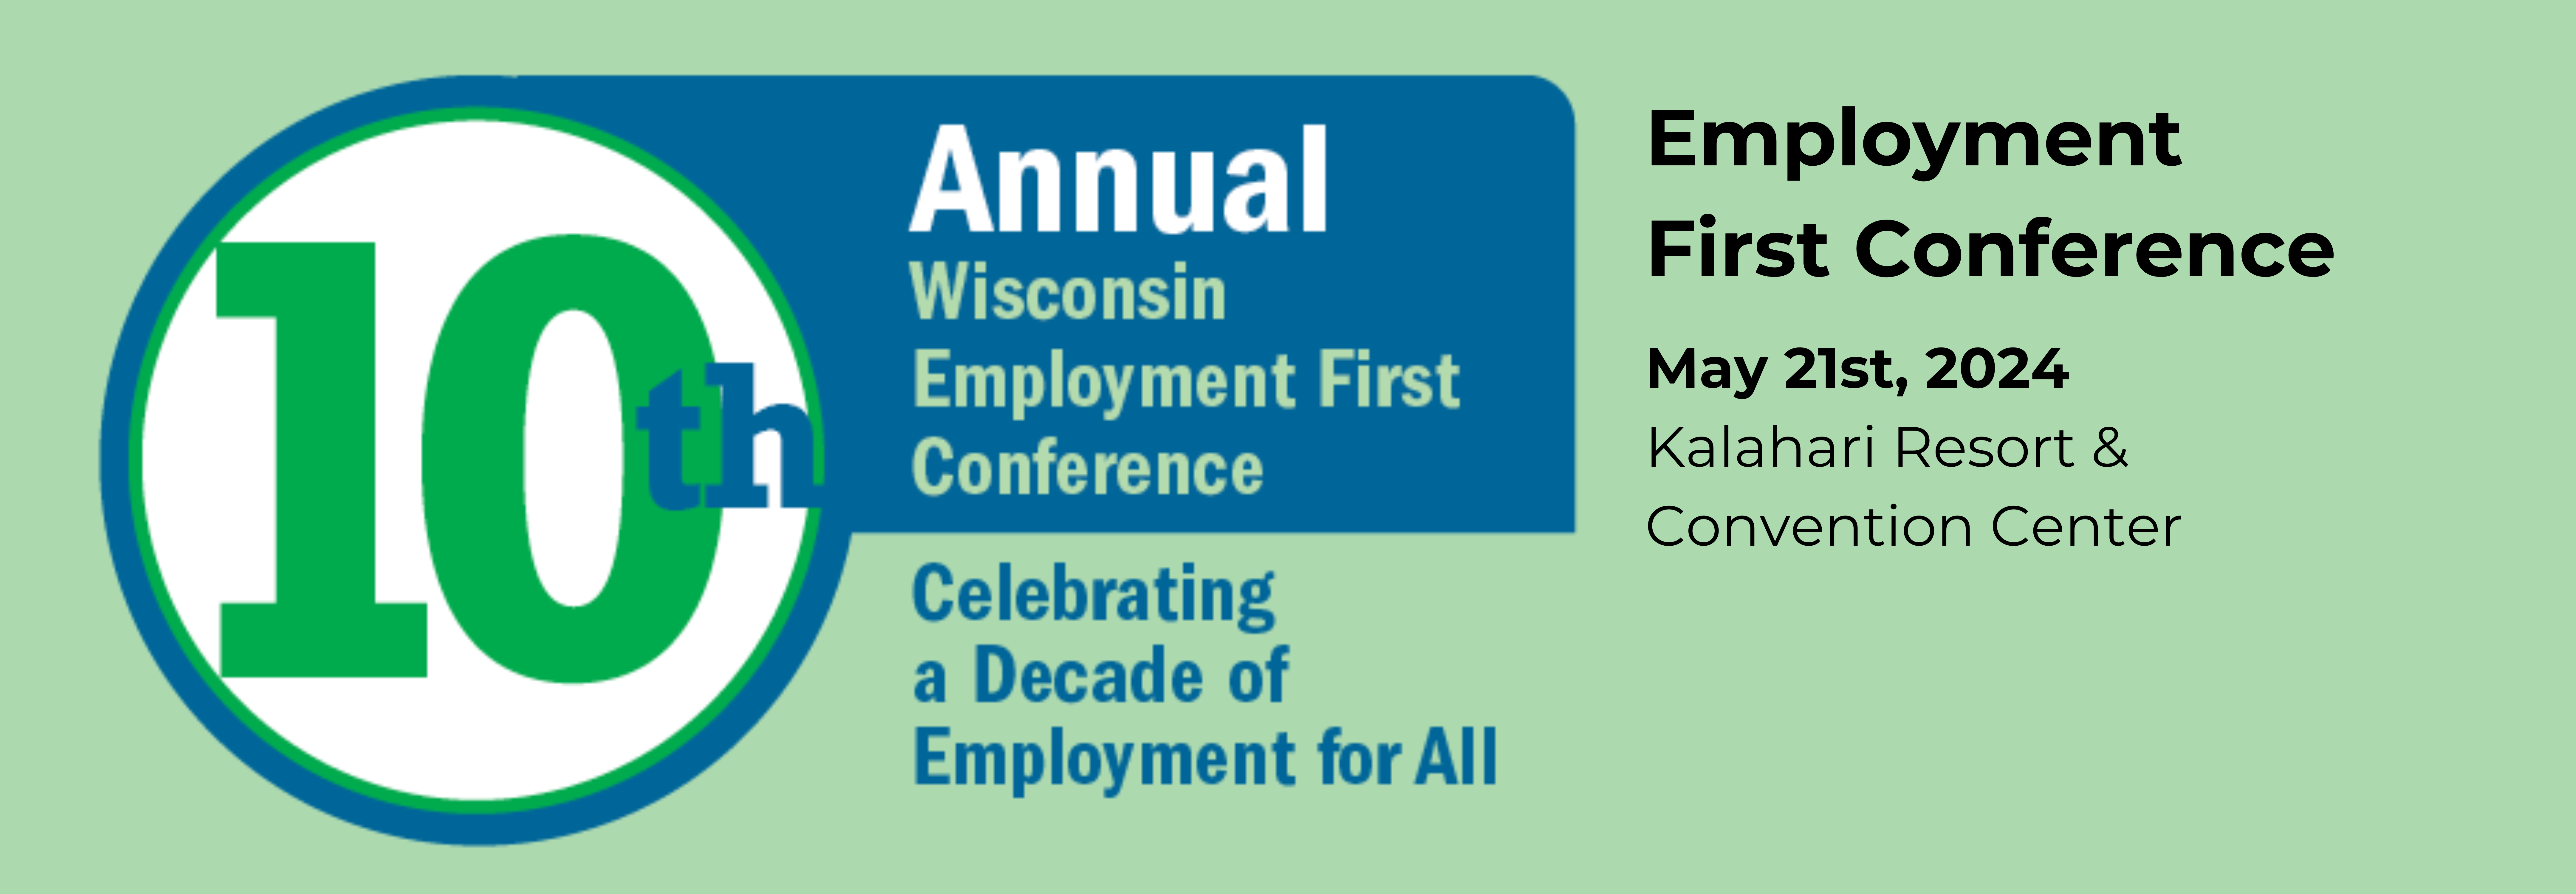 2024 Employment First Conference